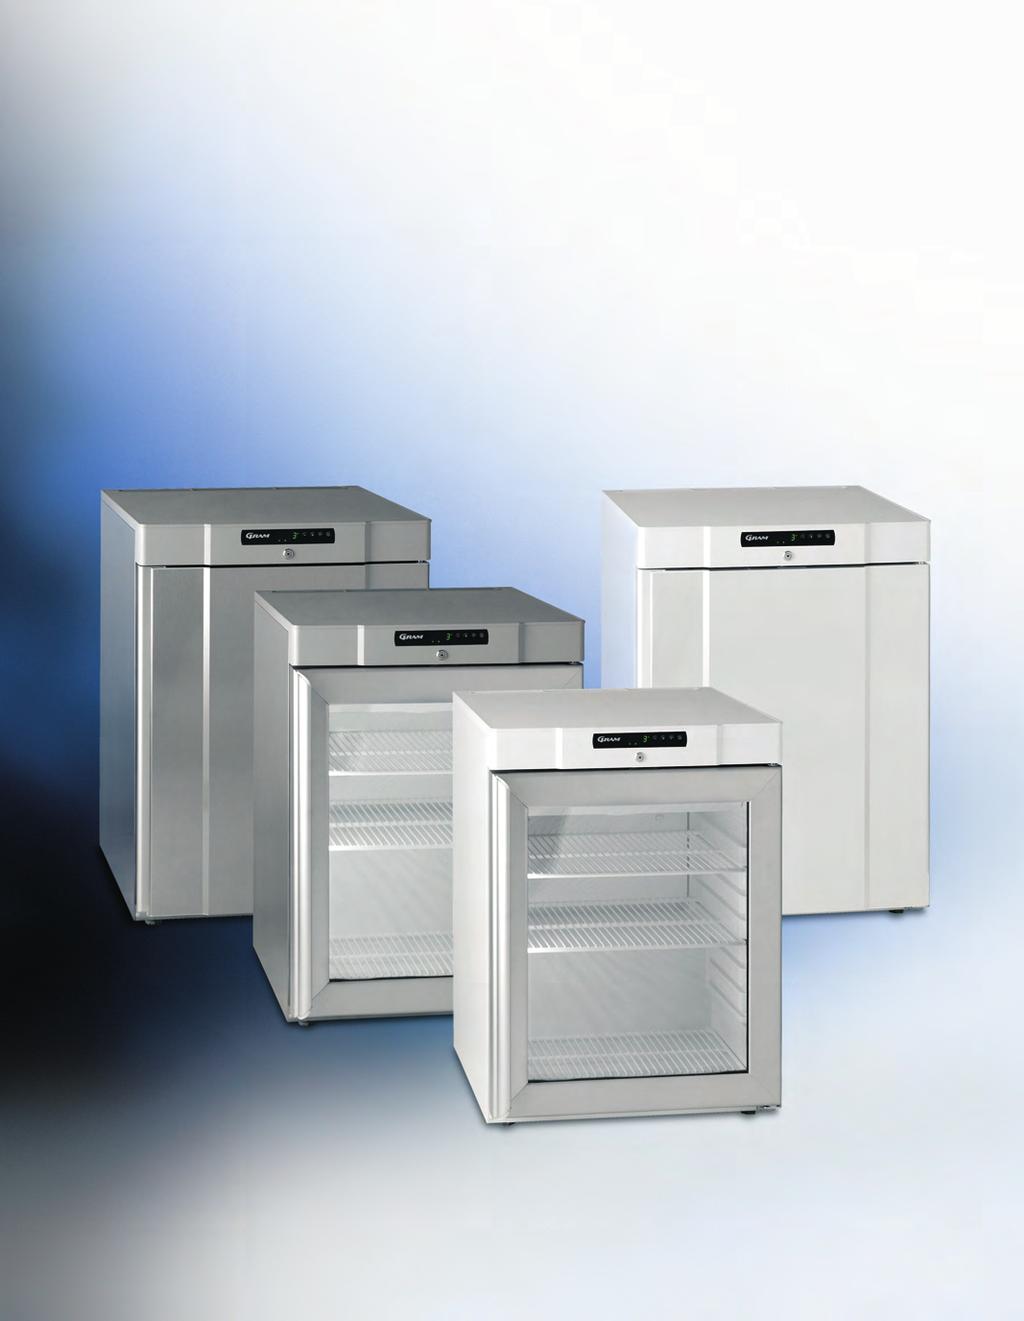 Column combination Refrigerators and freezers have the same dimensions and are easily combined.